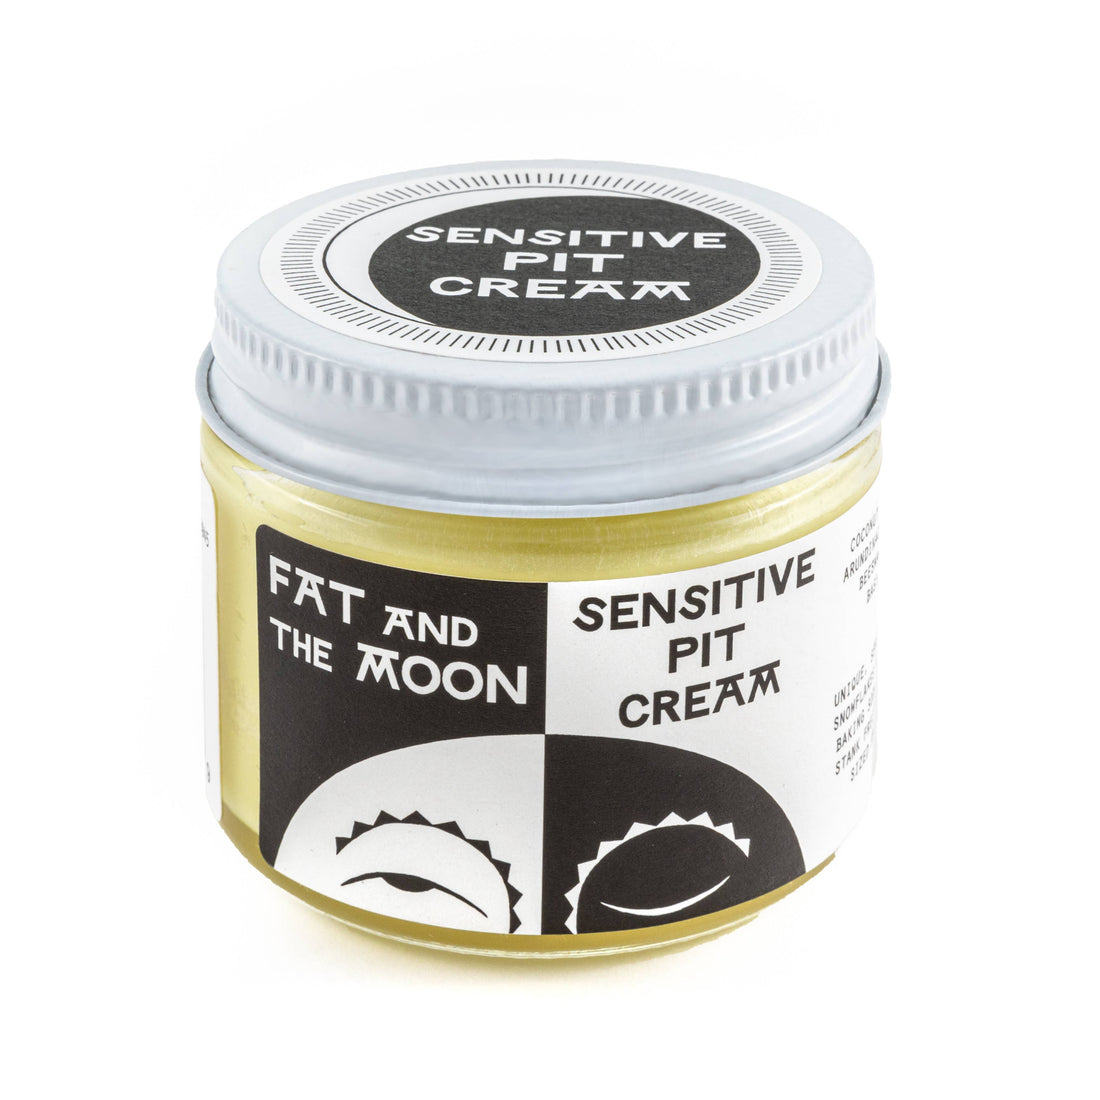 Fat and the Moon - 2 oz Sensitive Pit Cream